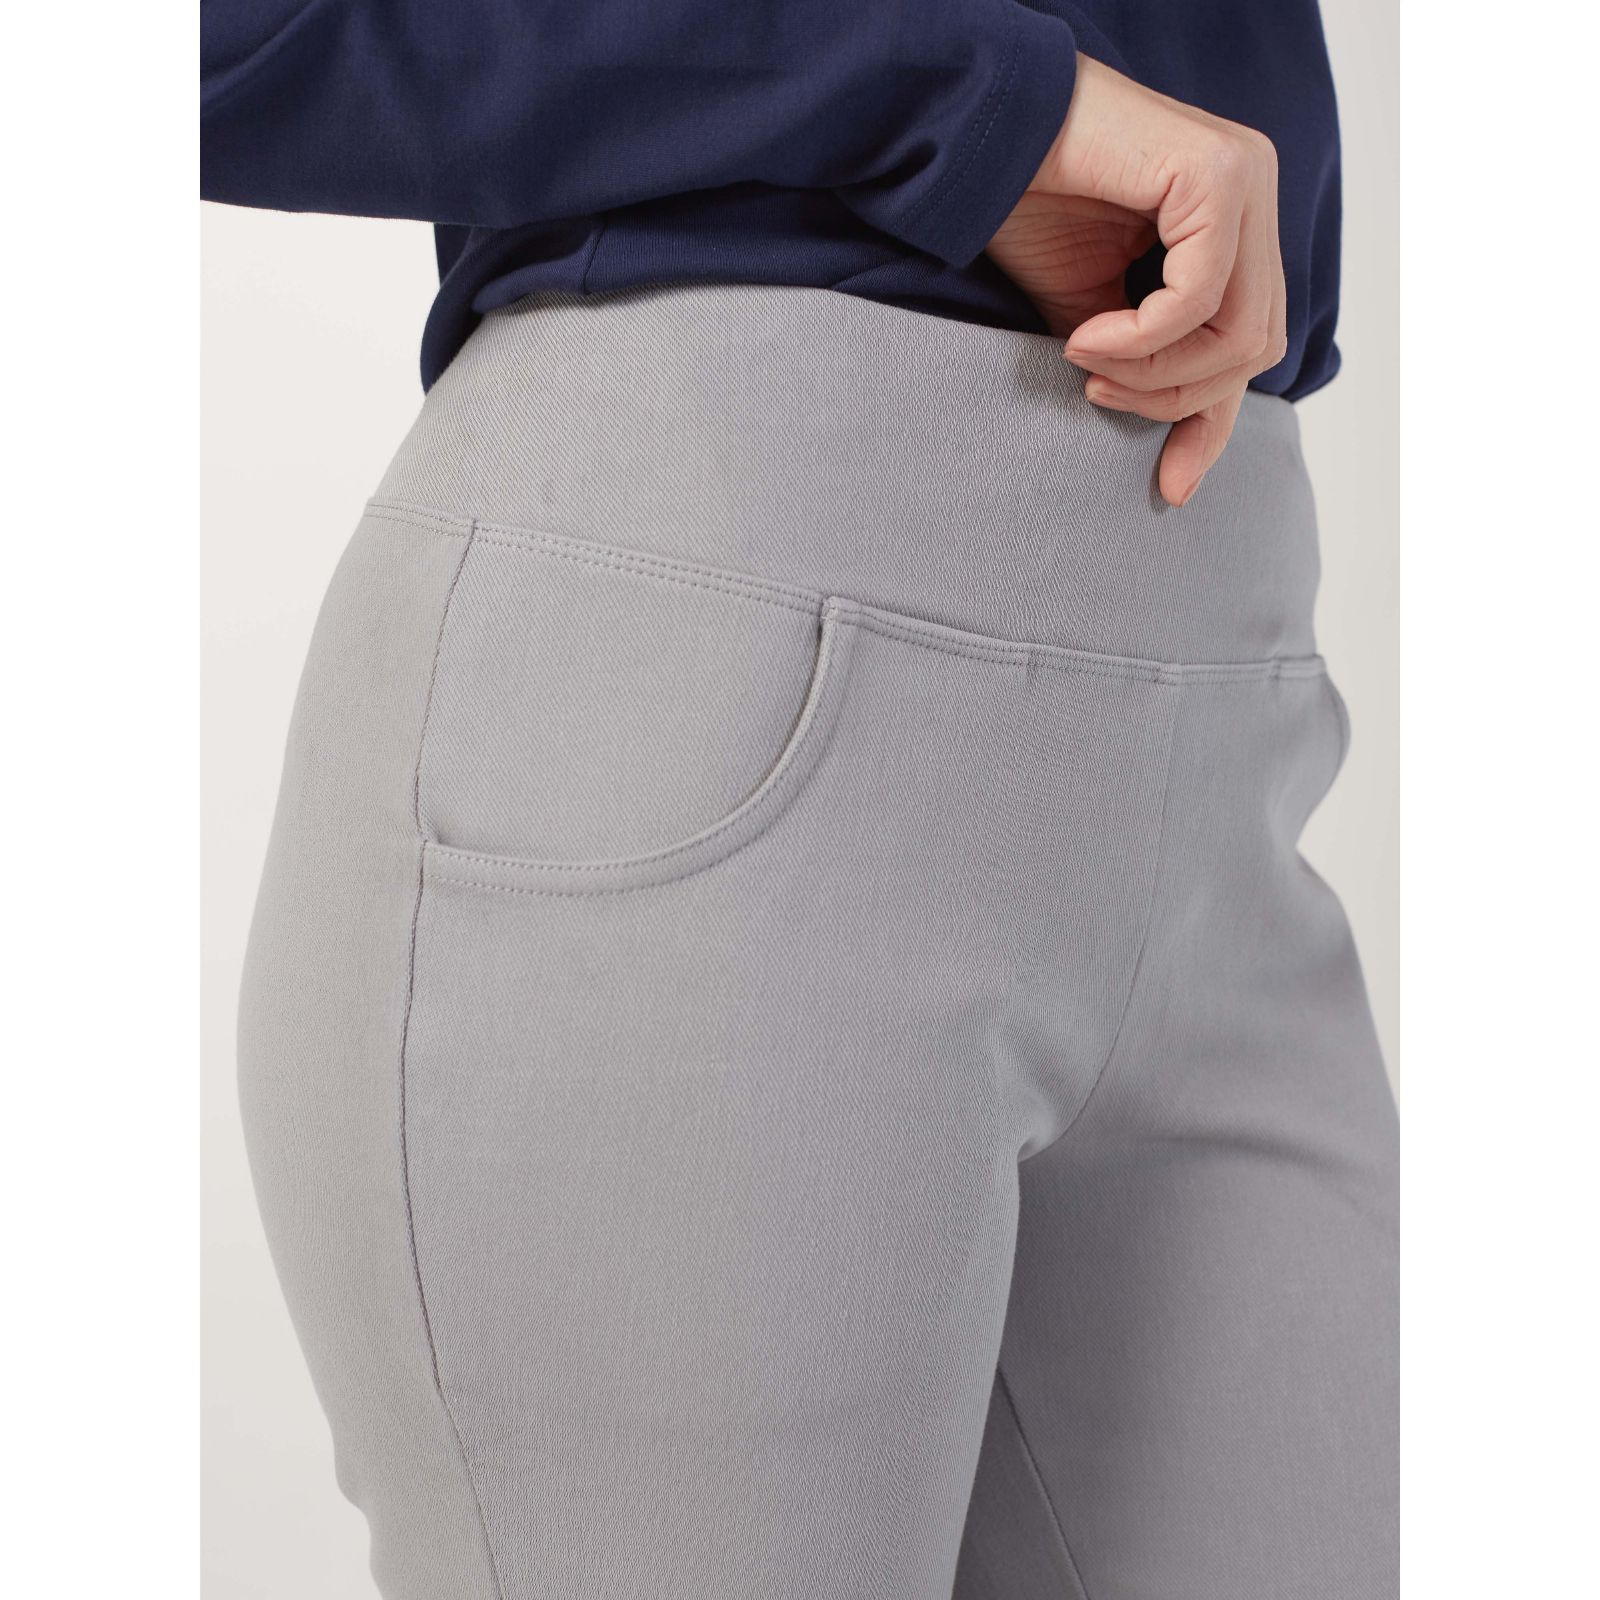 Women with Control Regular Prime Stretch Demin Leggings with Pockets